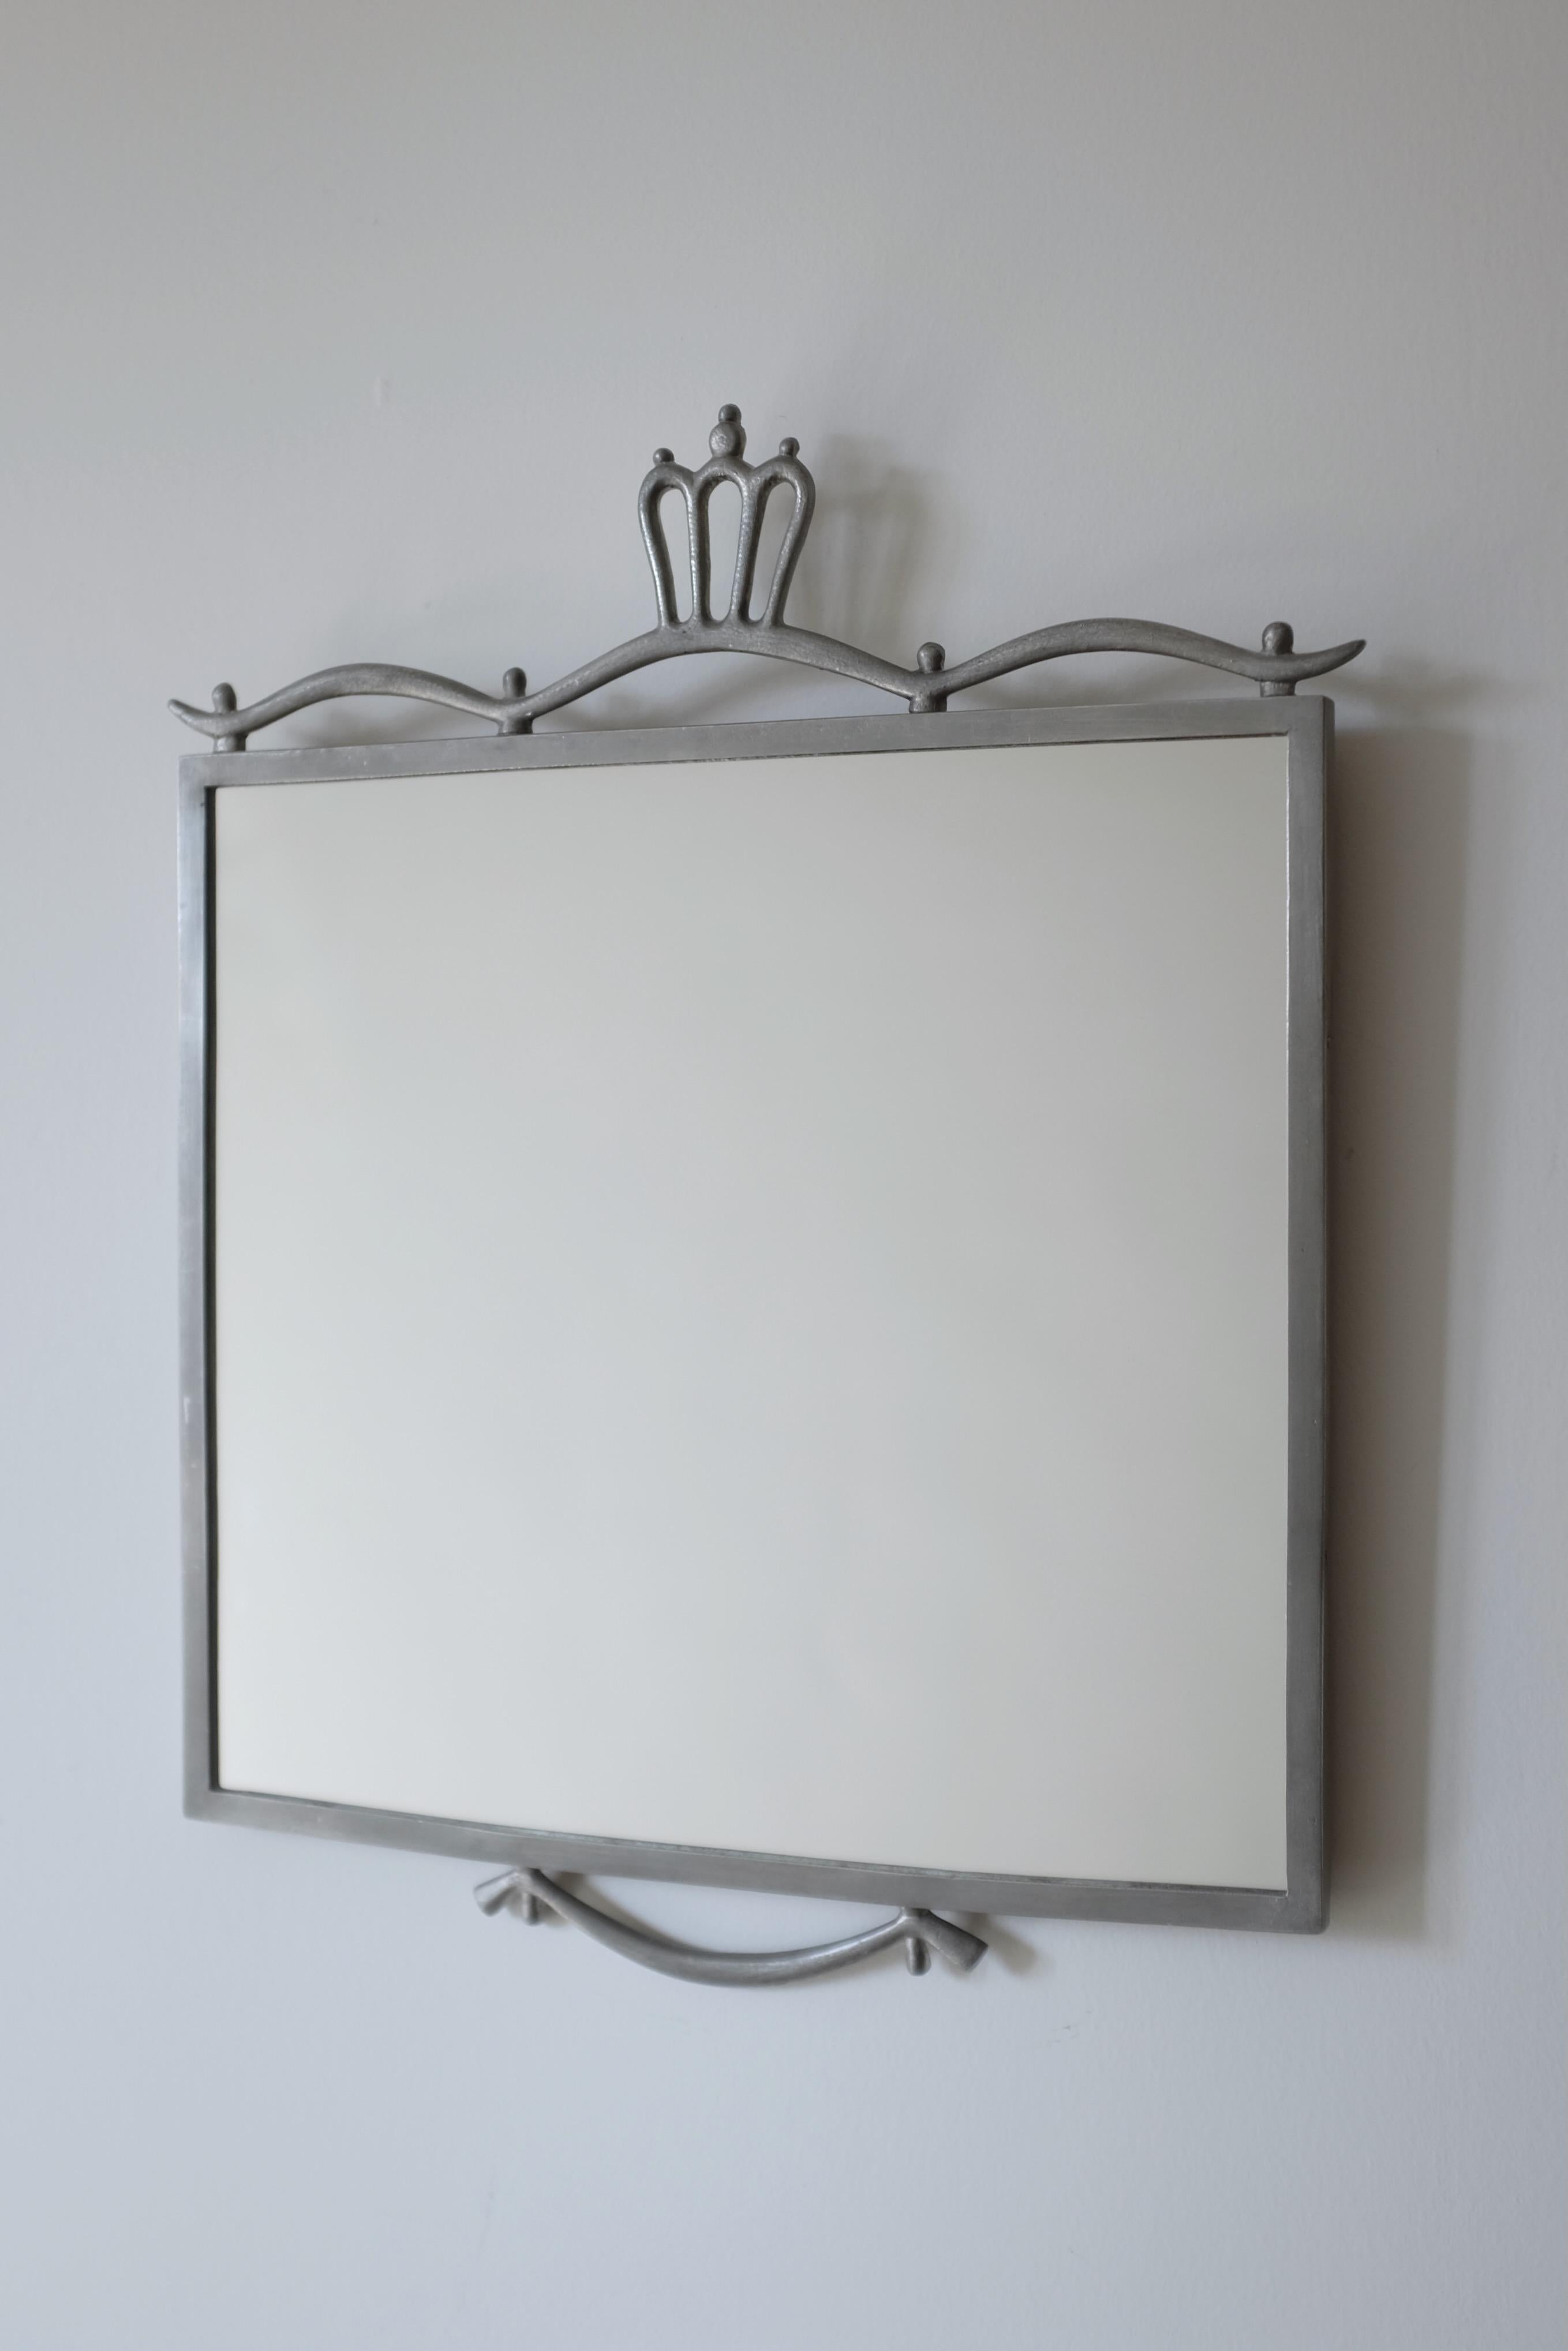 Beautiful Swedish Grace Pewter Mirror by Edvin Ollers from 1924. An almost square design with decorative ornaments at the top and bottom of the mirror. New glass and marked with designer name and year of manufacturing. Edvin Ollers was a Swedish